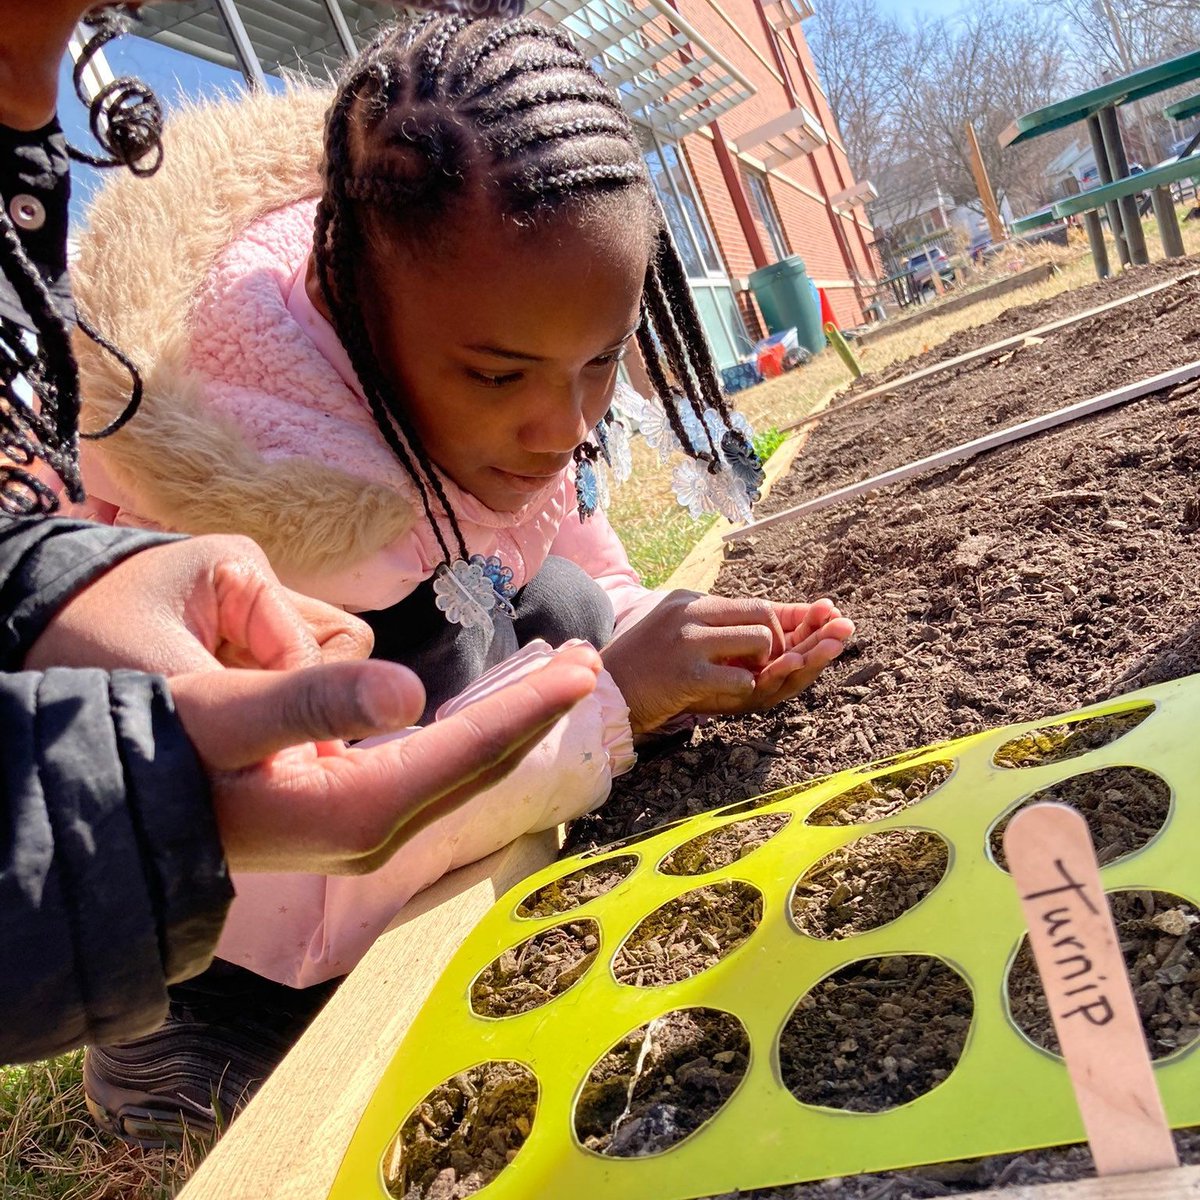 Such a lovely planting day last week at West Boulevard Elementary! These hands-on experiences are part of our Farm to School partnership with Columbia Public Schools! We love days like this🥰